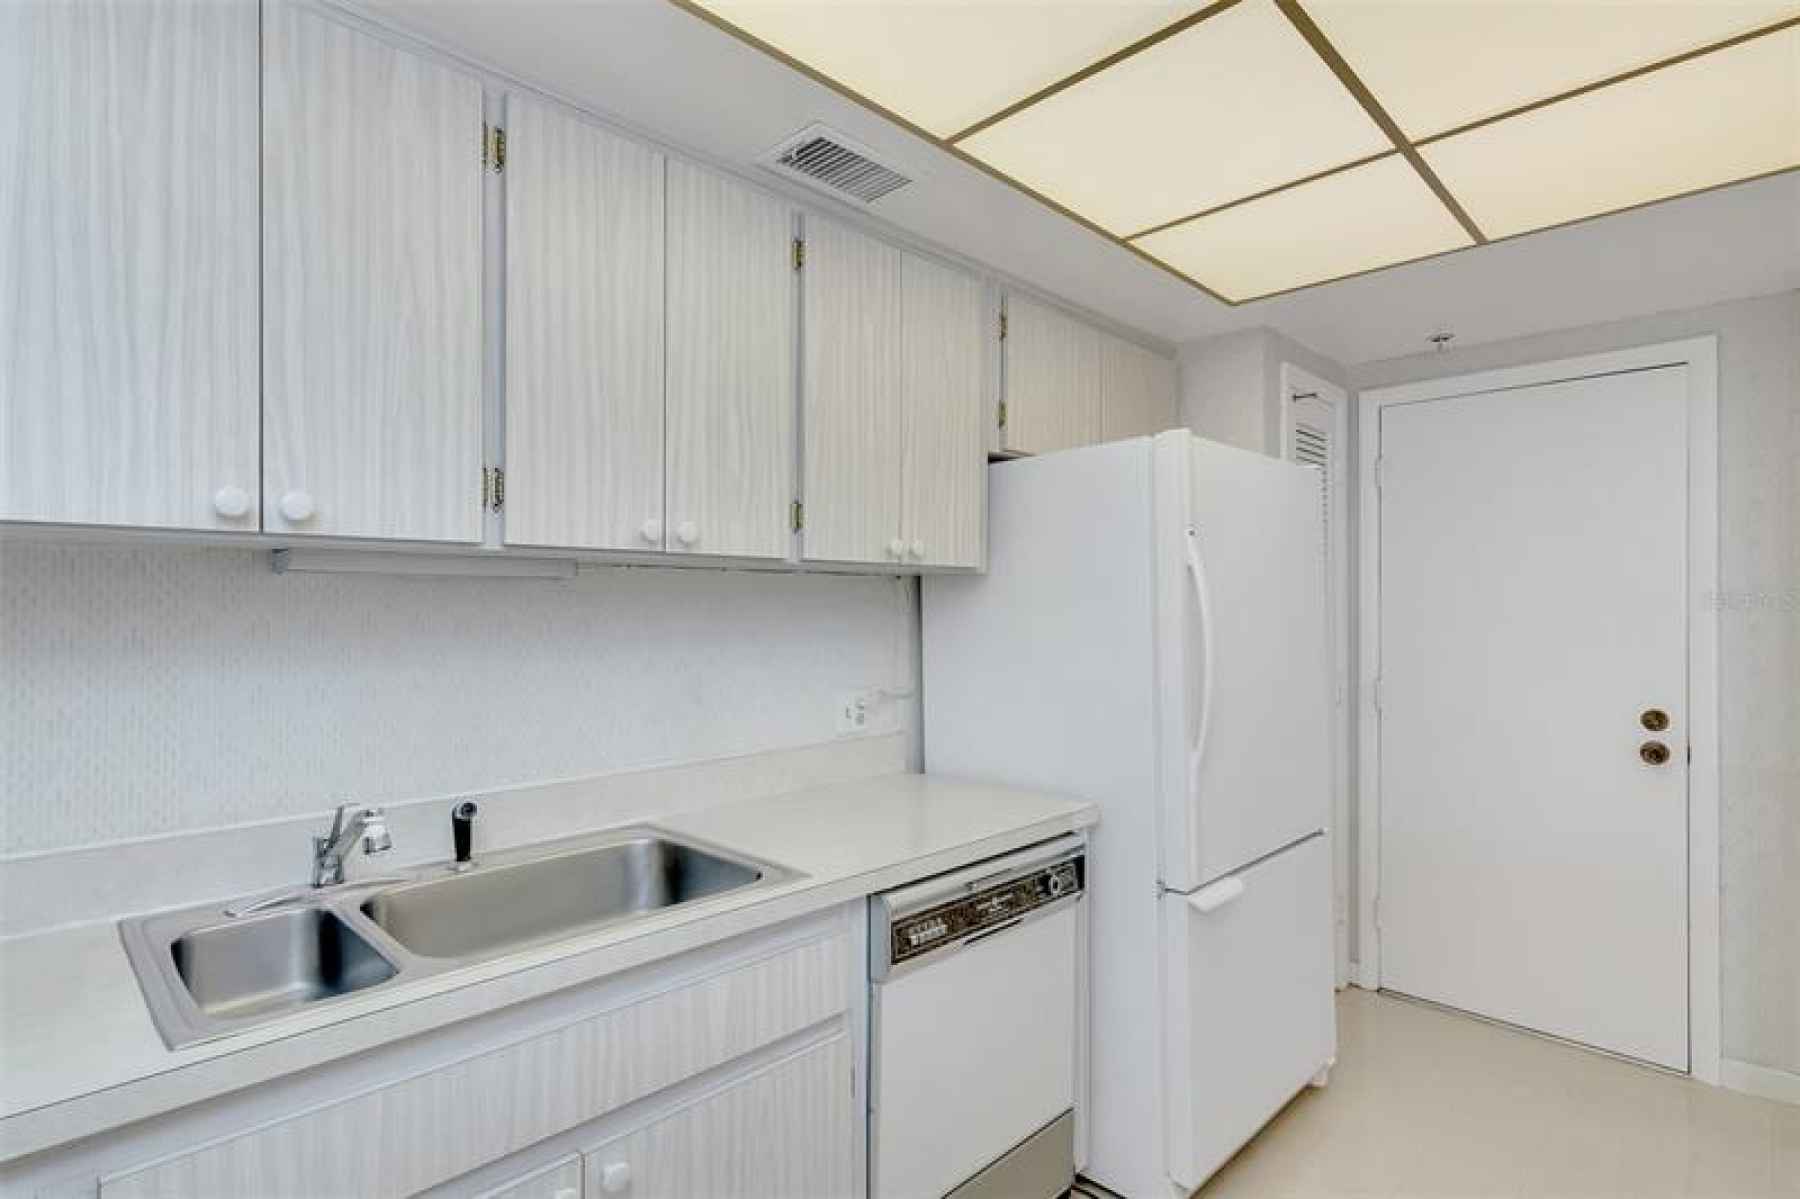 An extra doorway in the kitchen for easy access to take out trash, head to the laundry room, emergen